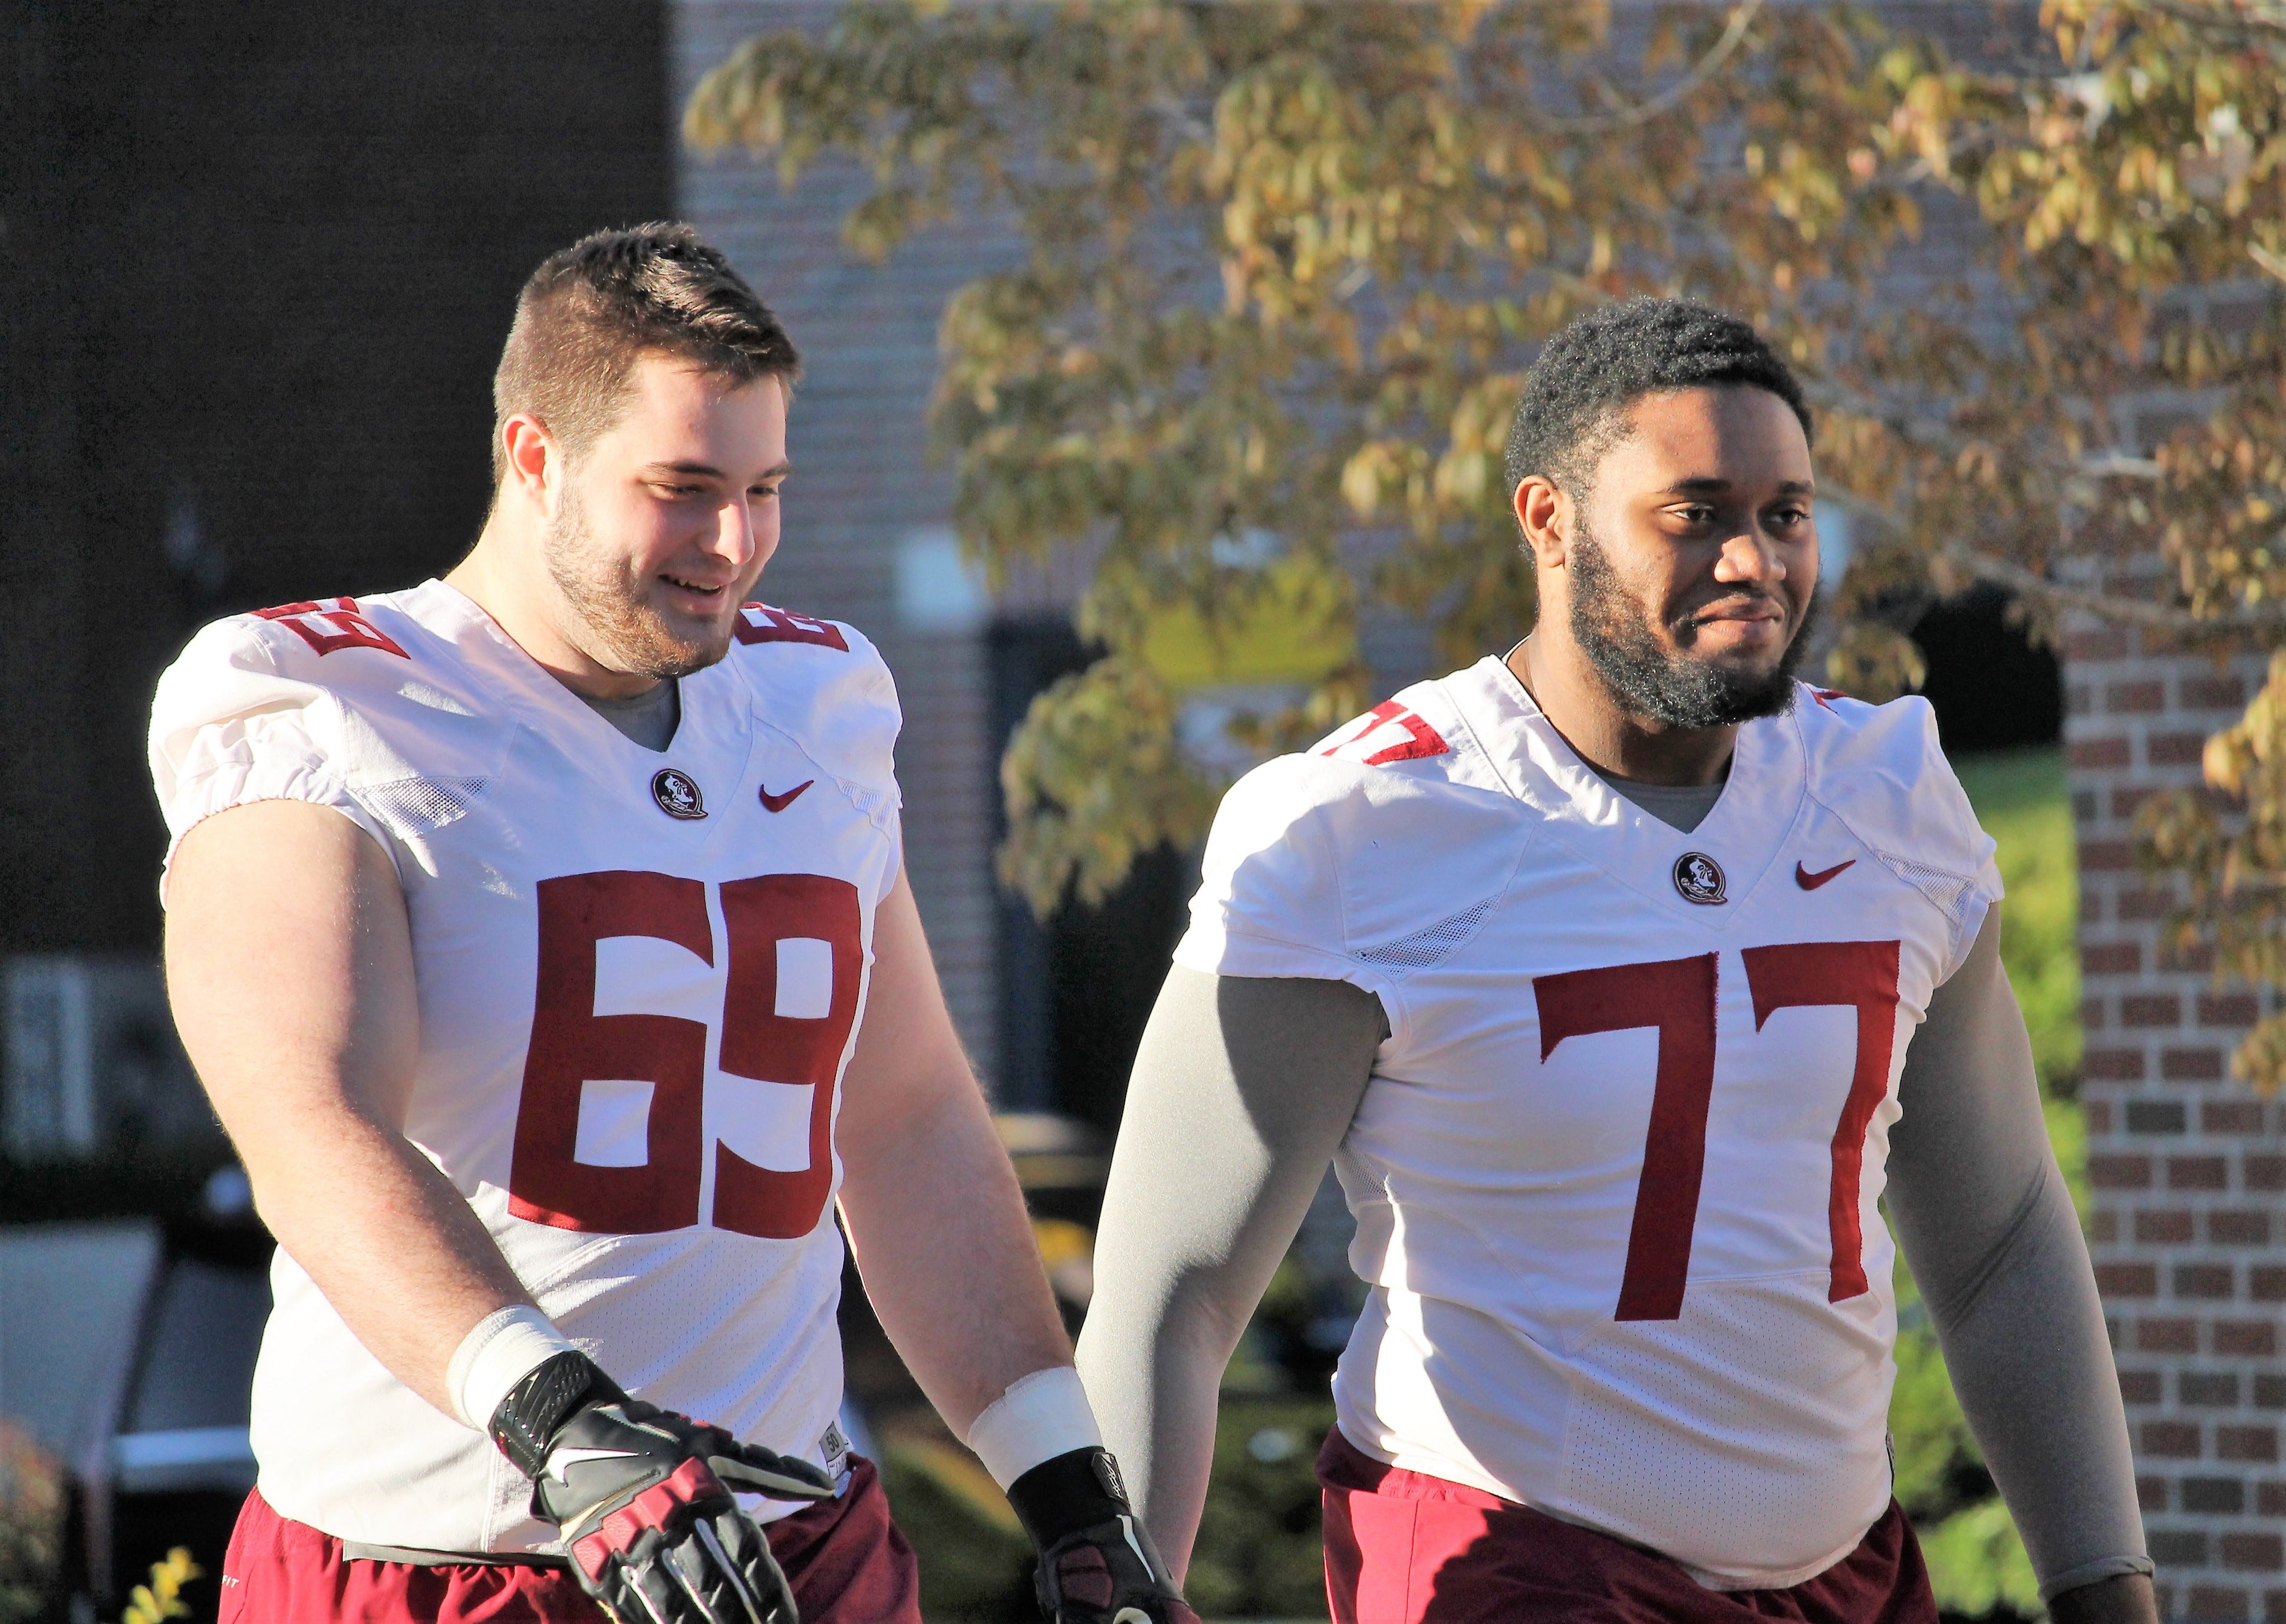 Offensive linemen Landon Dickerson and Christian Armstrong at FSU football practice on March 6, 2019.